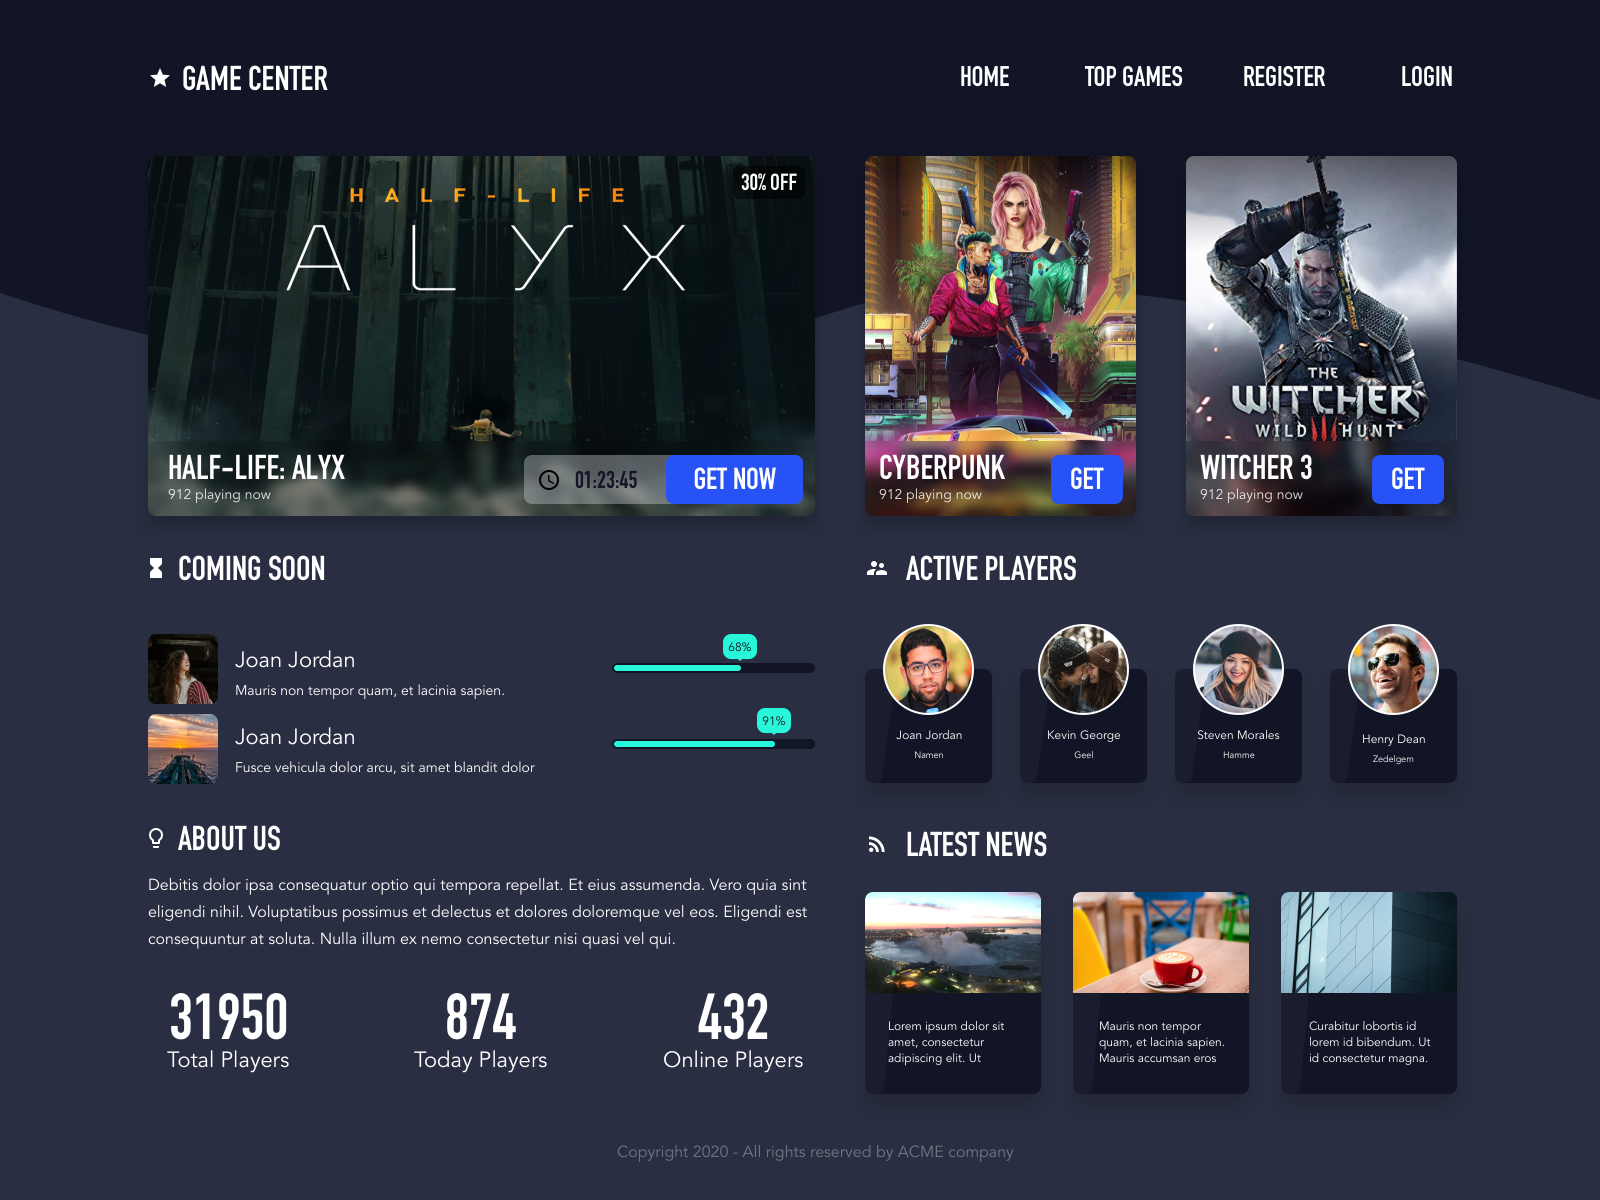 Game store UI by Pouya Saadeghi - /projects/ibT4Ao7EGRb1LgzZ7VNWc53LdVYGdp6V.png